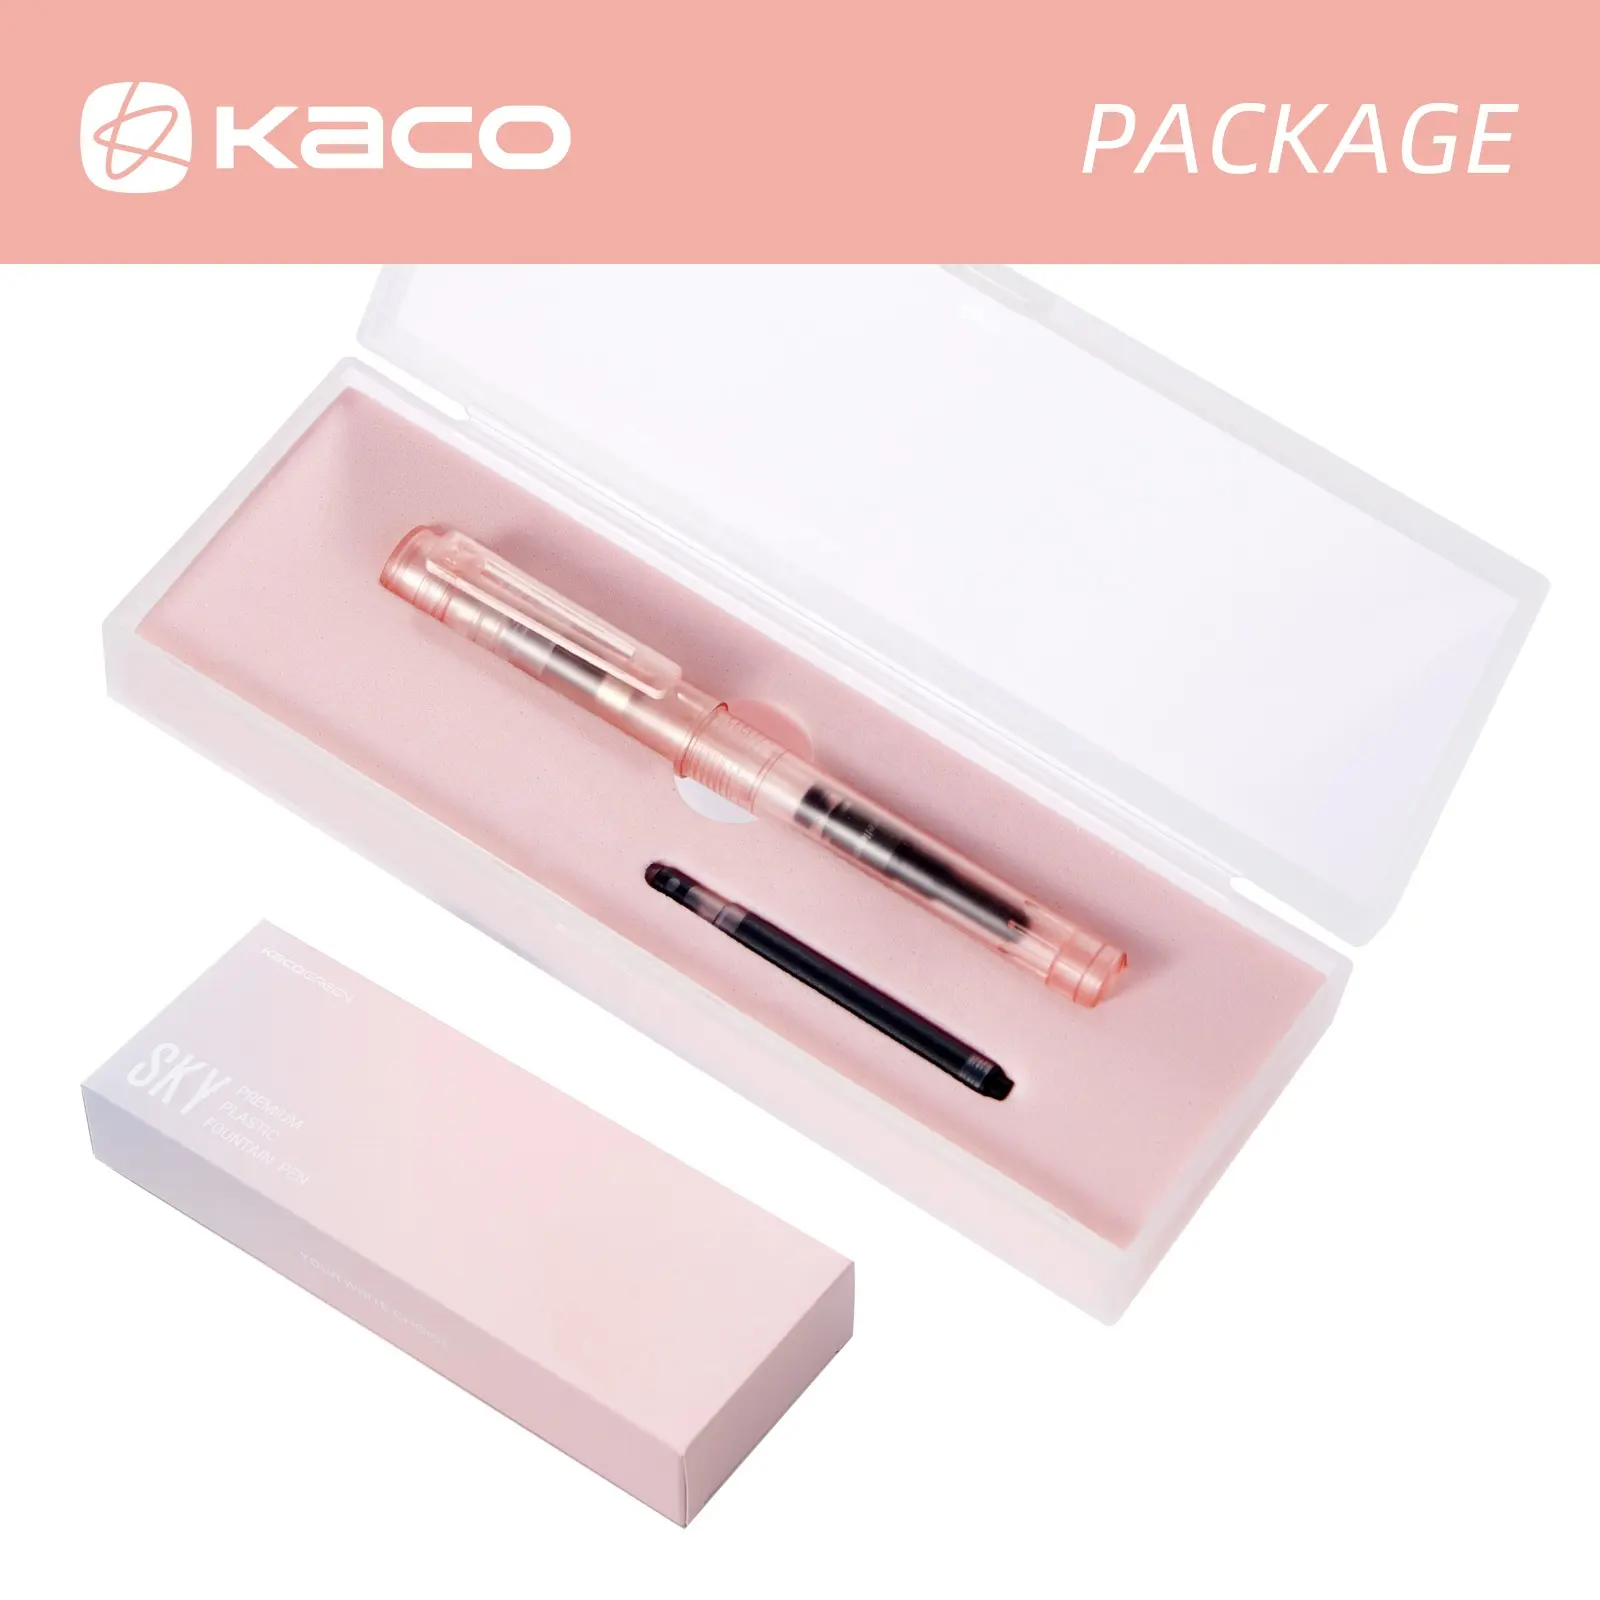 KACO SKY II Fountain Pen Pink Barrel Extra Fine Nib With 2 Black Ink Cartridges And 1 Converter In PP Box